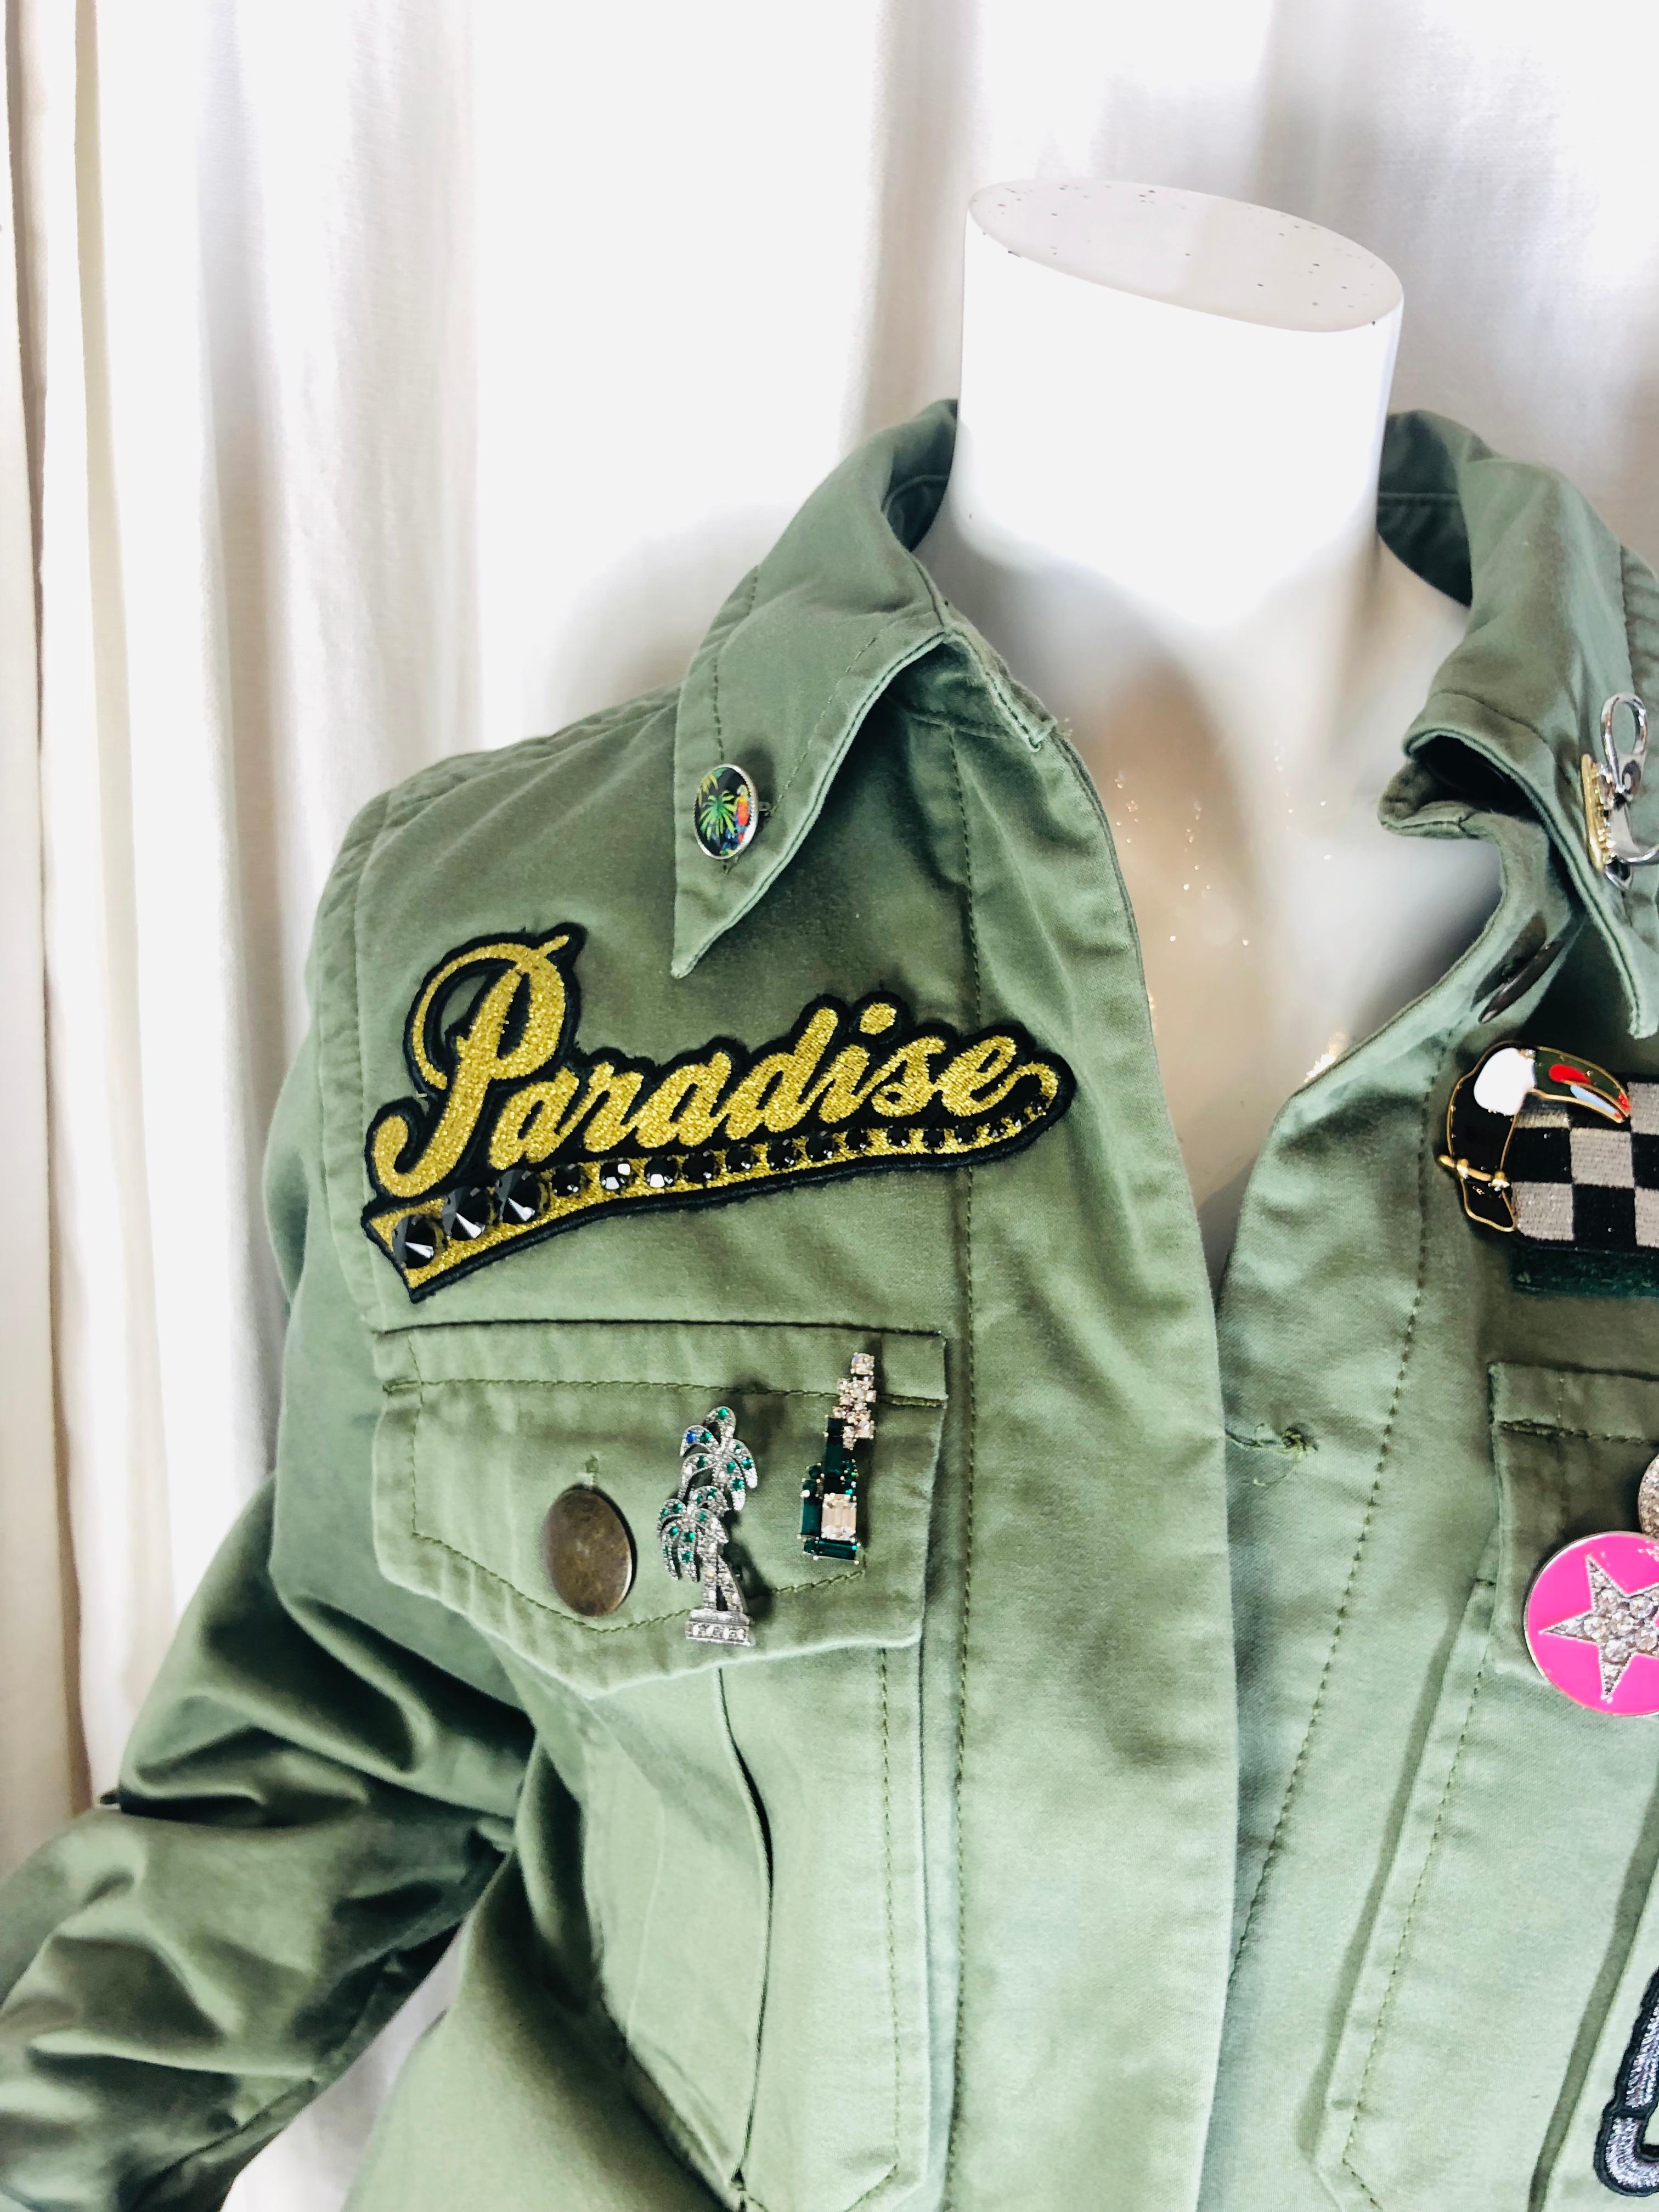 Marc Jacobs Army Green Military Style Jacket w/ Patches & Pins.
Size 8.